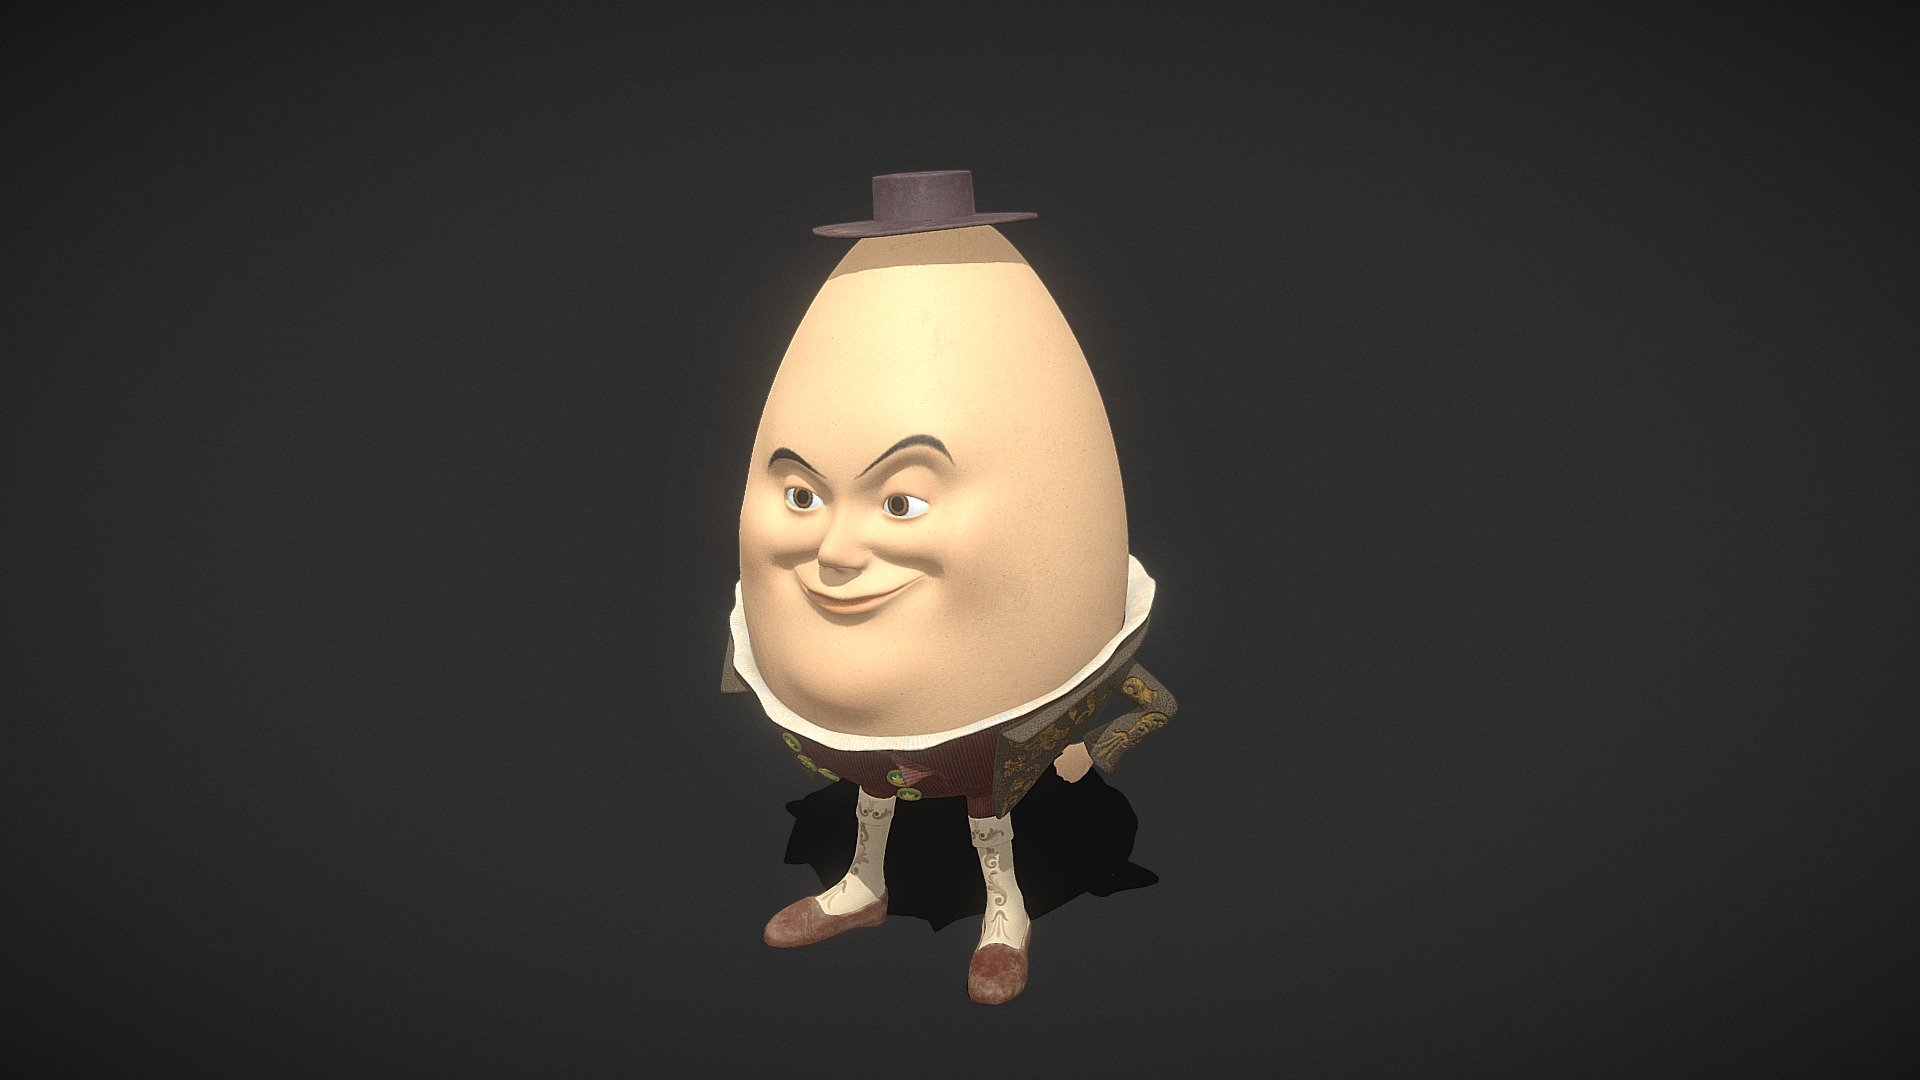 Modeling in blender and zbrush
Texturing in substance painter
If you like it, leave a comment and like it thank you ;) - Humpty - Buy Royalty Free 3D model by mahdikey1loo 3d model